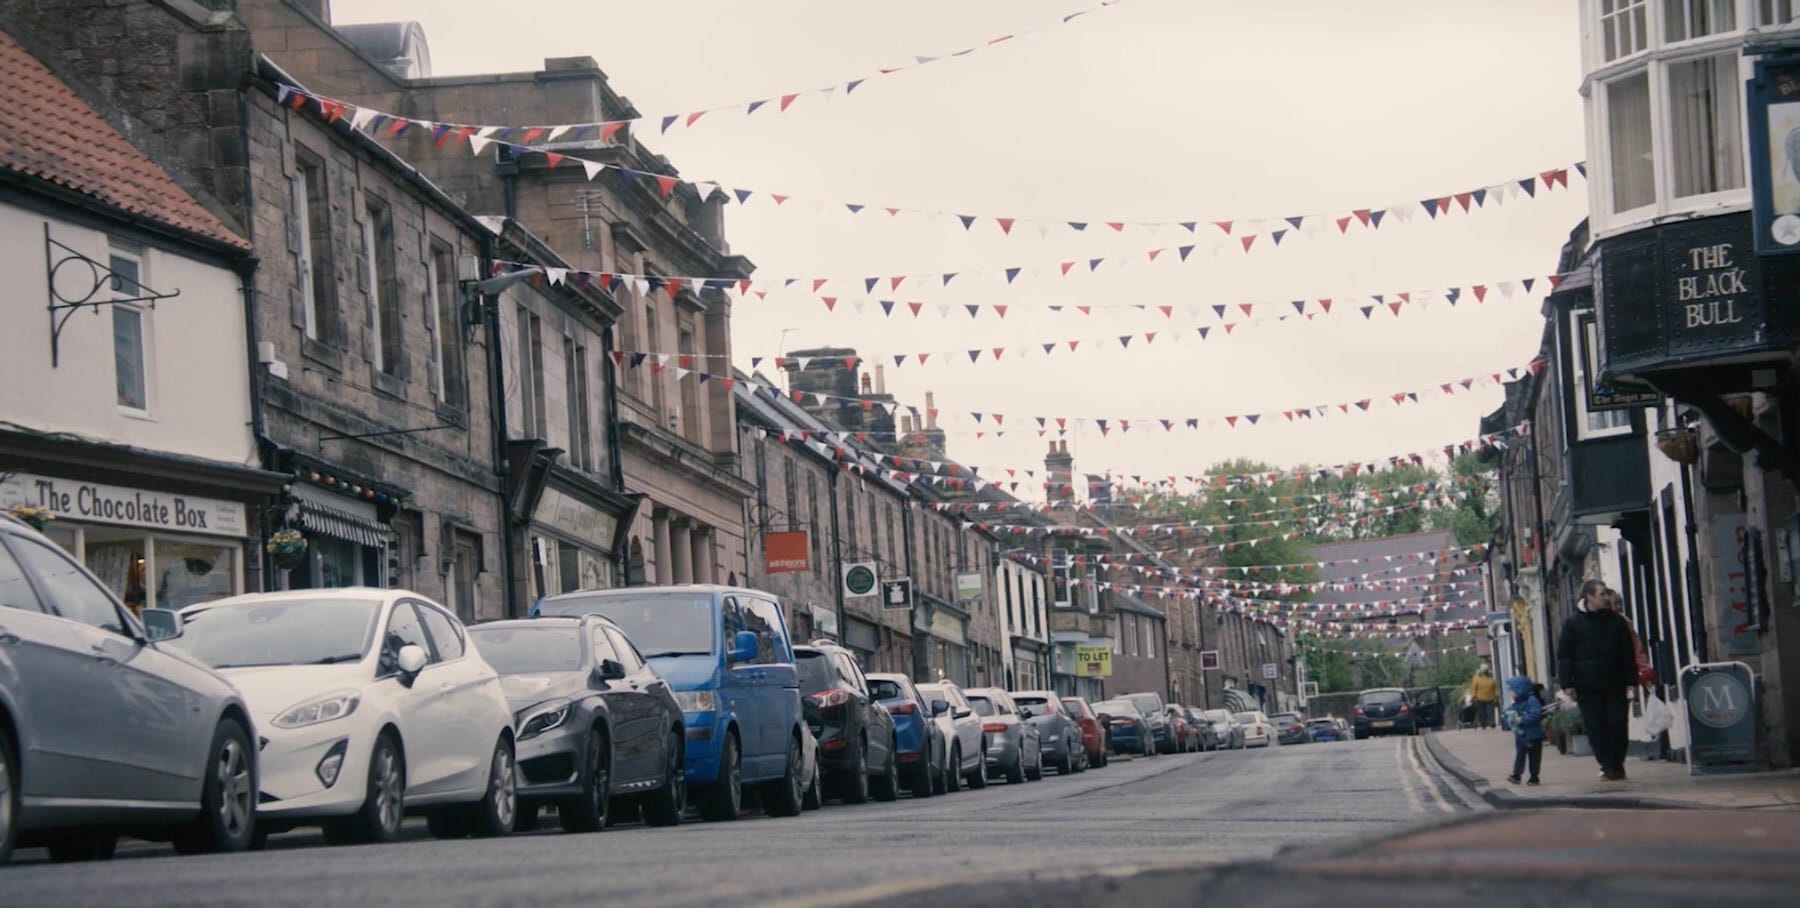 Still from video - street with bunting